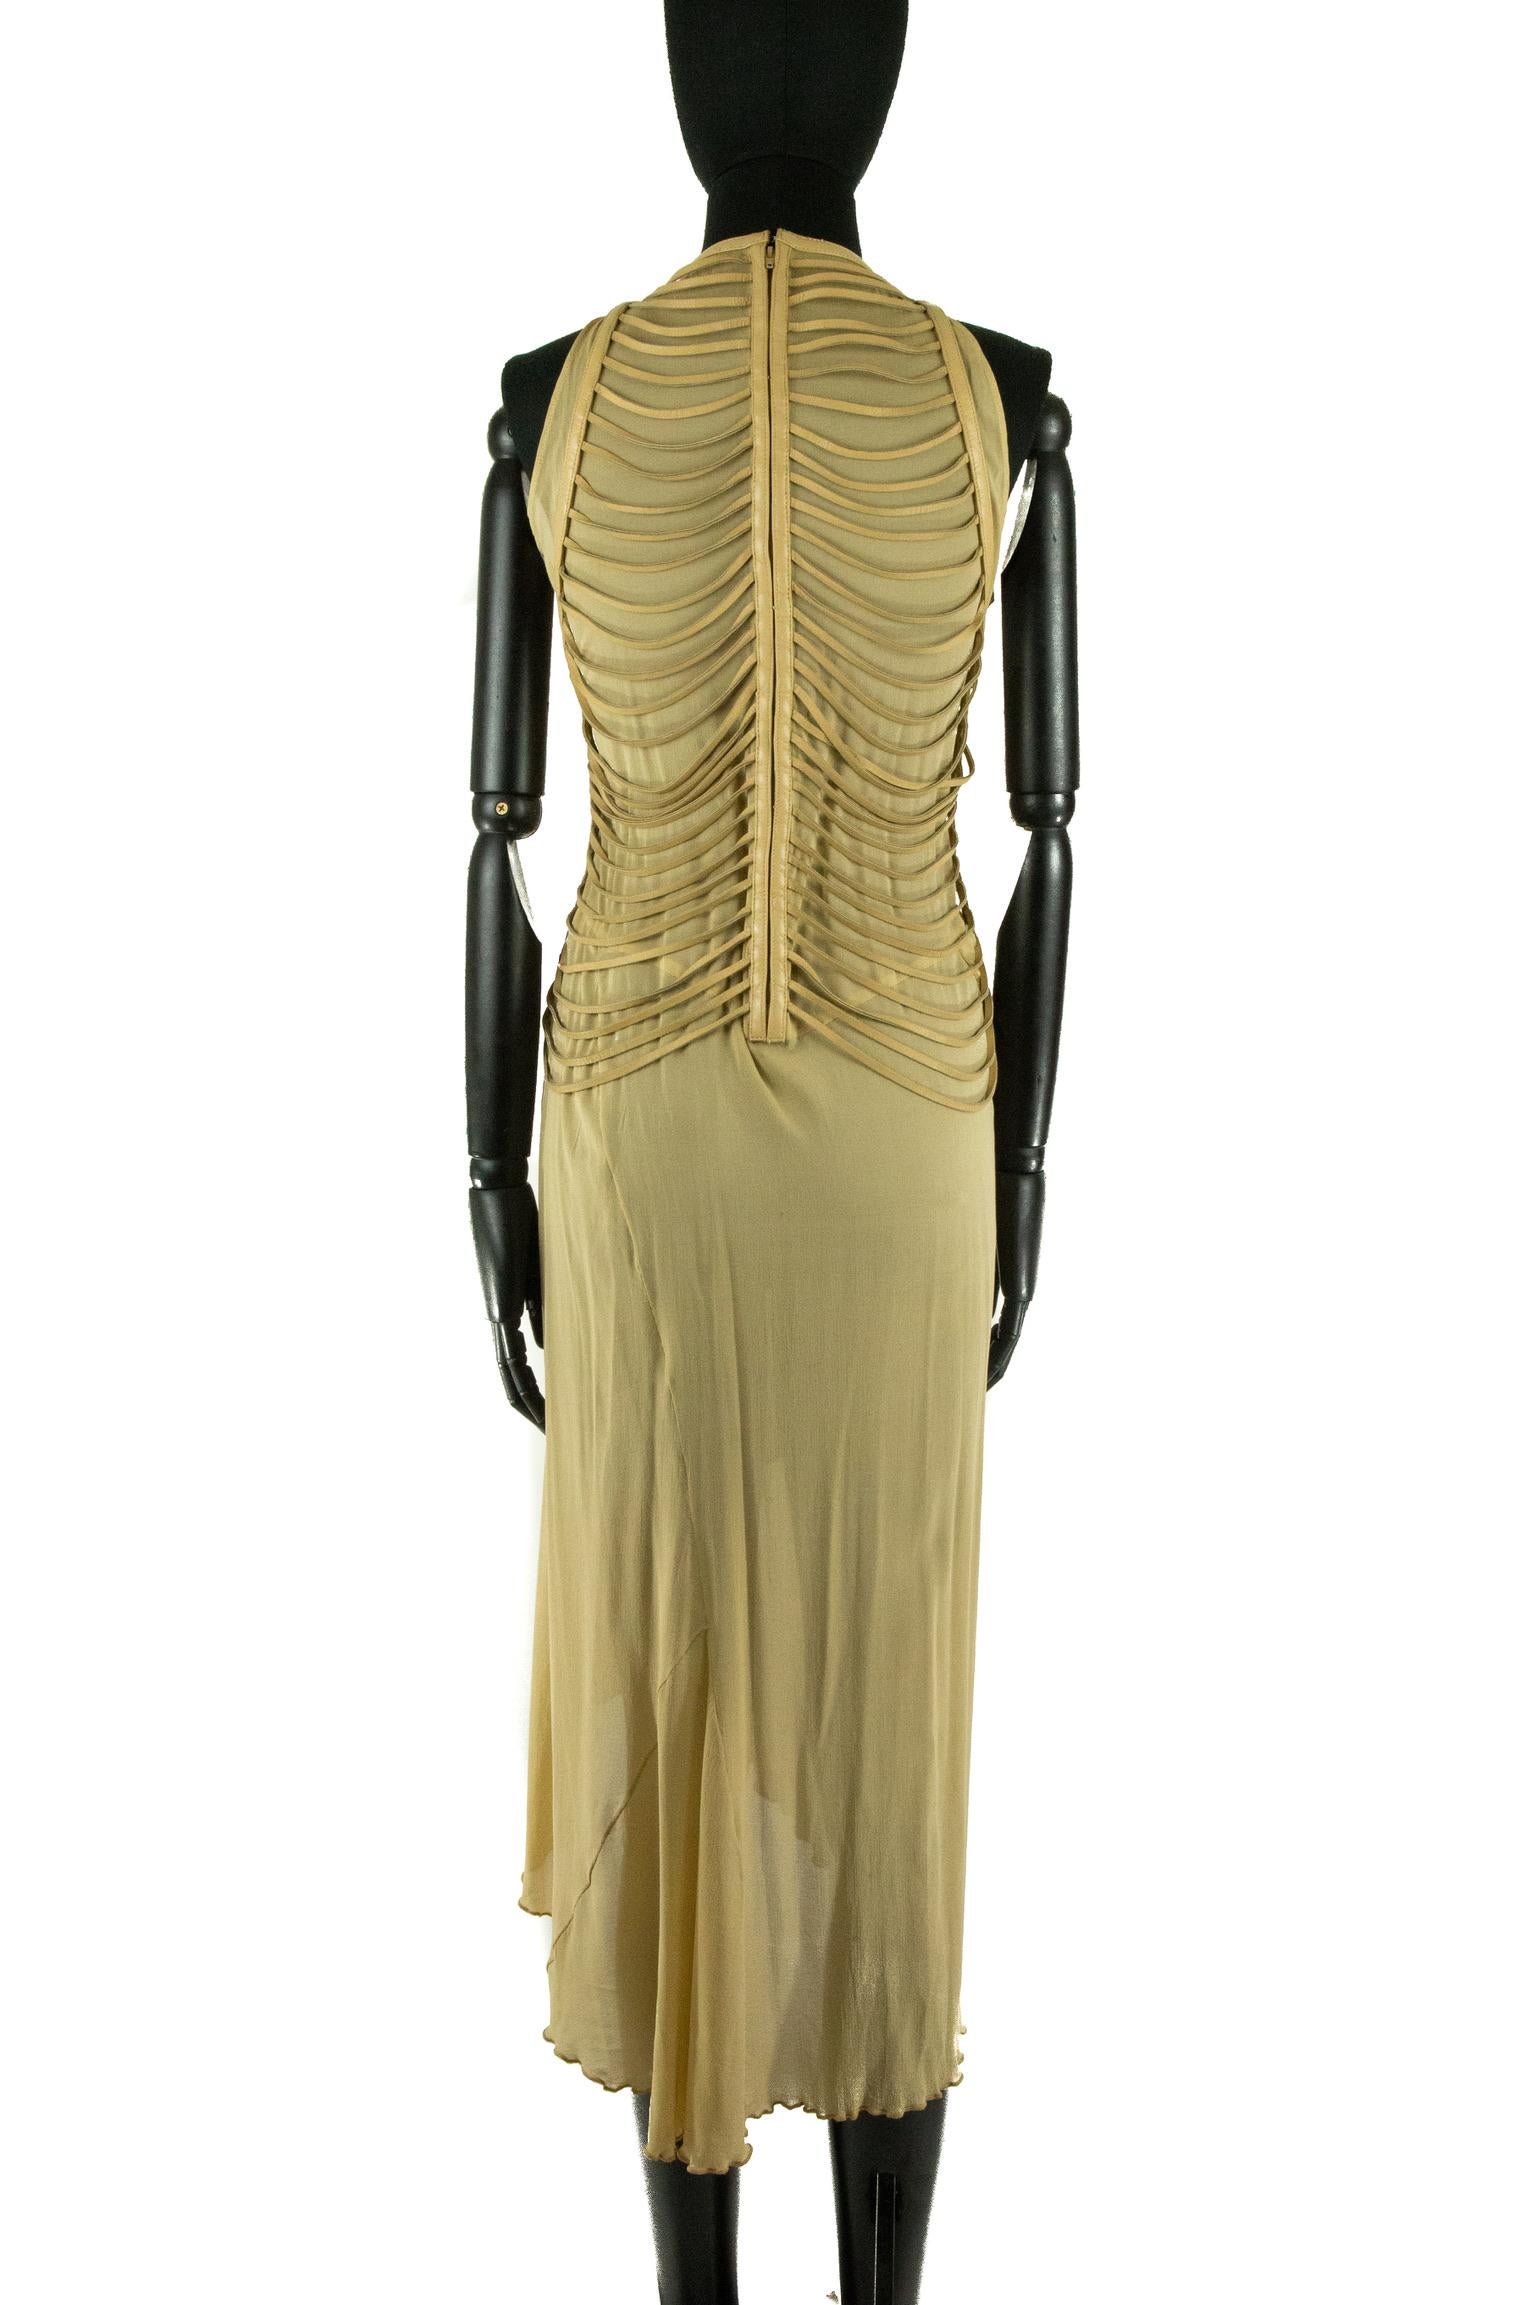 A Jean Claude Jitrois chiffon taupe maxi dress with a layer of beige leather fringing draped perpendicular across the bodice. The dress is sleeveless and features a curved wrap in the front. The dress is fastened down the centre back with a zip.
